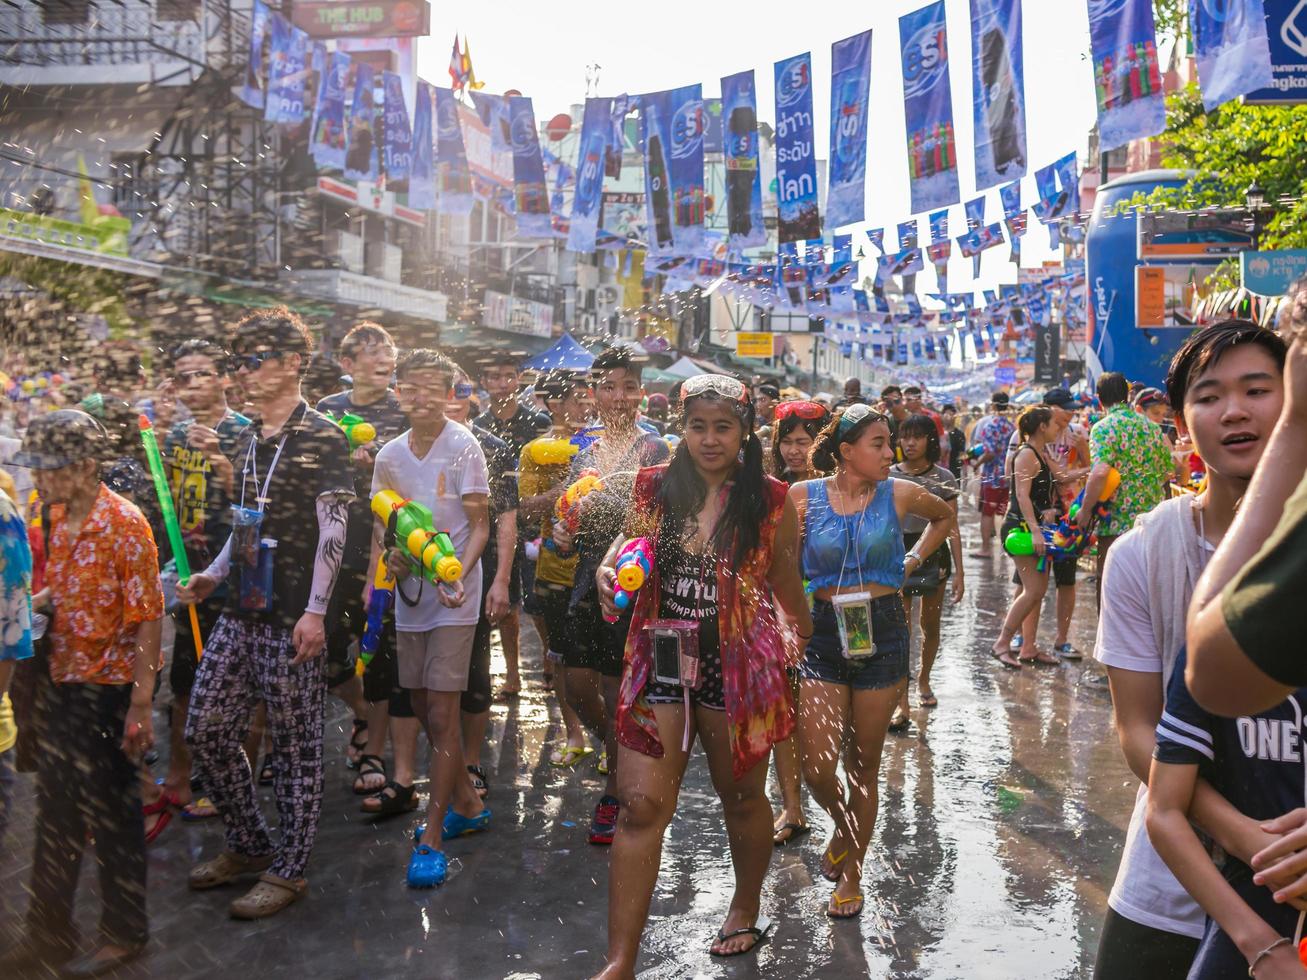 Bangkok, Thailand - April 14, 2016 Bangkok Songkran Festival Khaosan Road 2016, The Songkran festival is celebrated in Thailand as the traditional New Year's Day from 13 to 15 April. photo